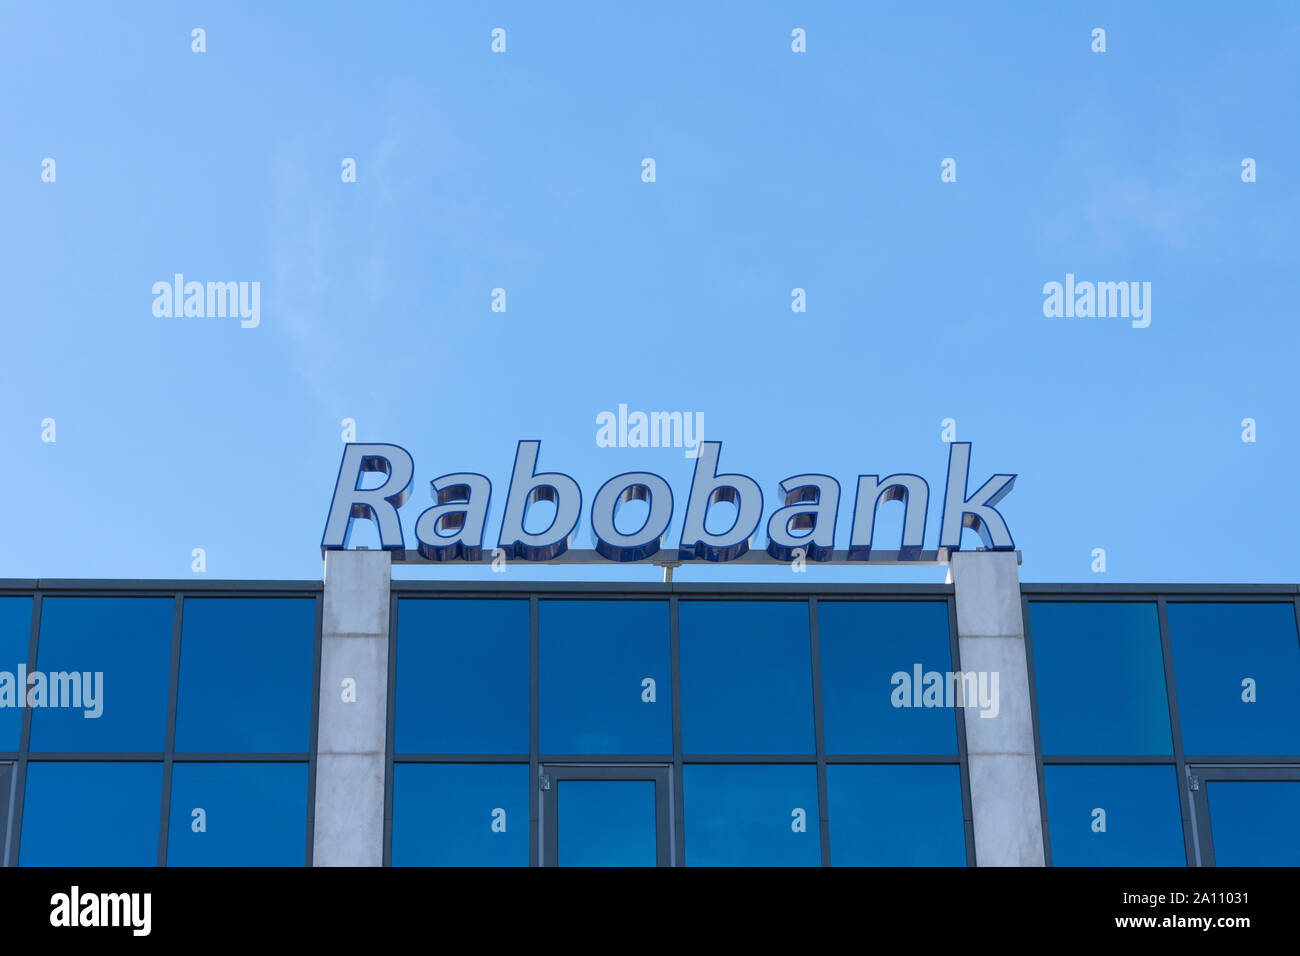 Terneuzen, The Netherlands, 15 September 2019, Rabobank sign, Rabobank is part of the Rabobank Group and claims to be the largest financial services p Stock Photo